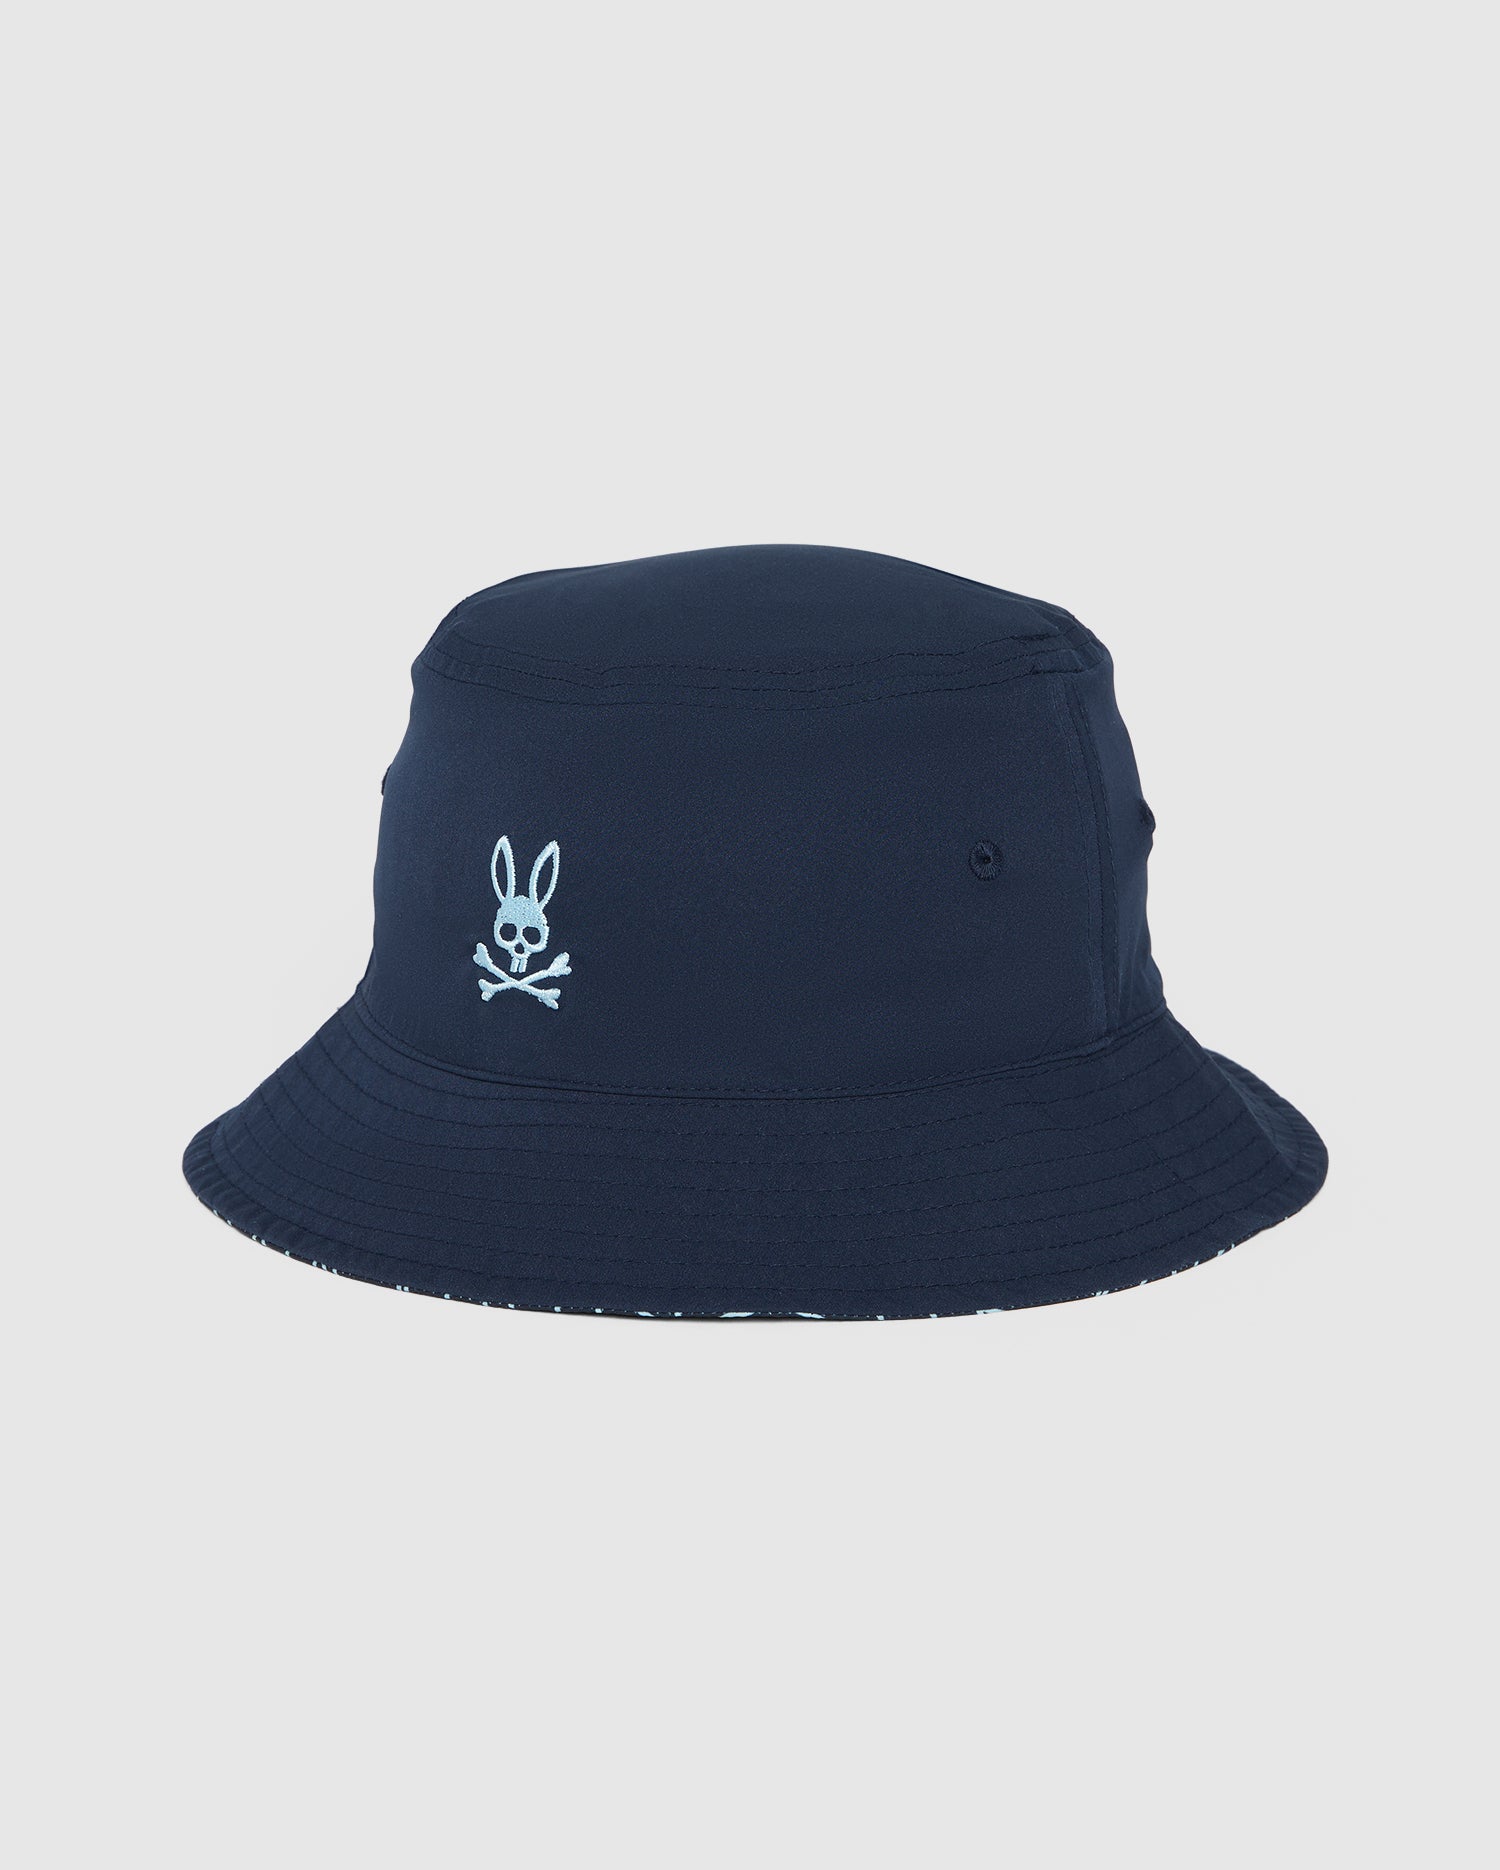 Shop Psycho Bunny Men's Bucket Hats | Find Your Perfect Style